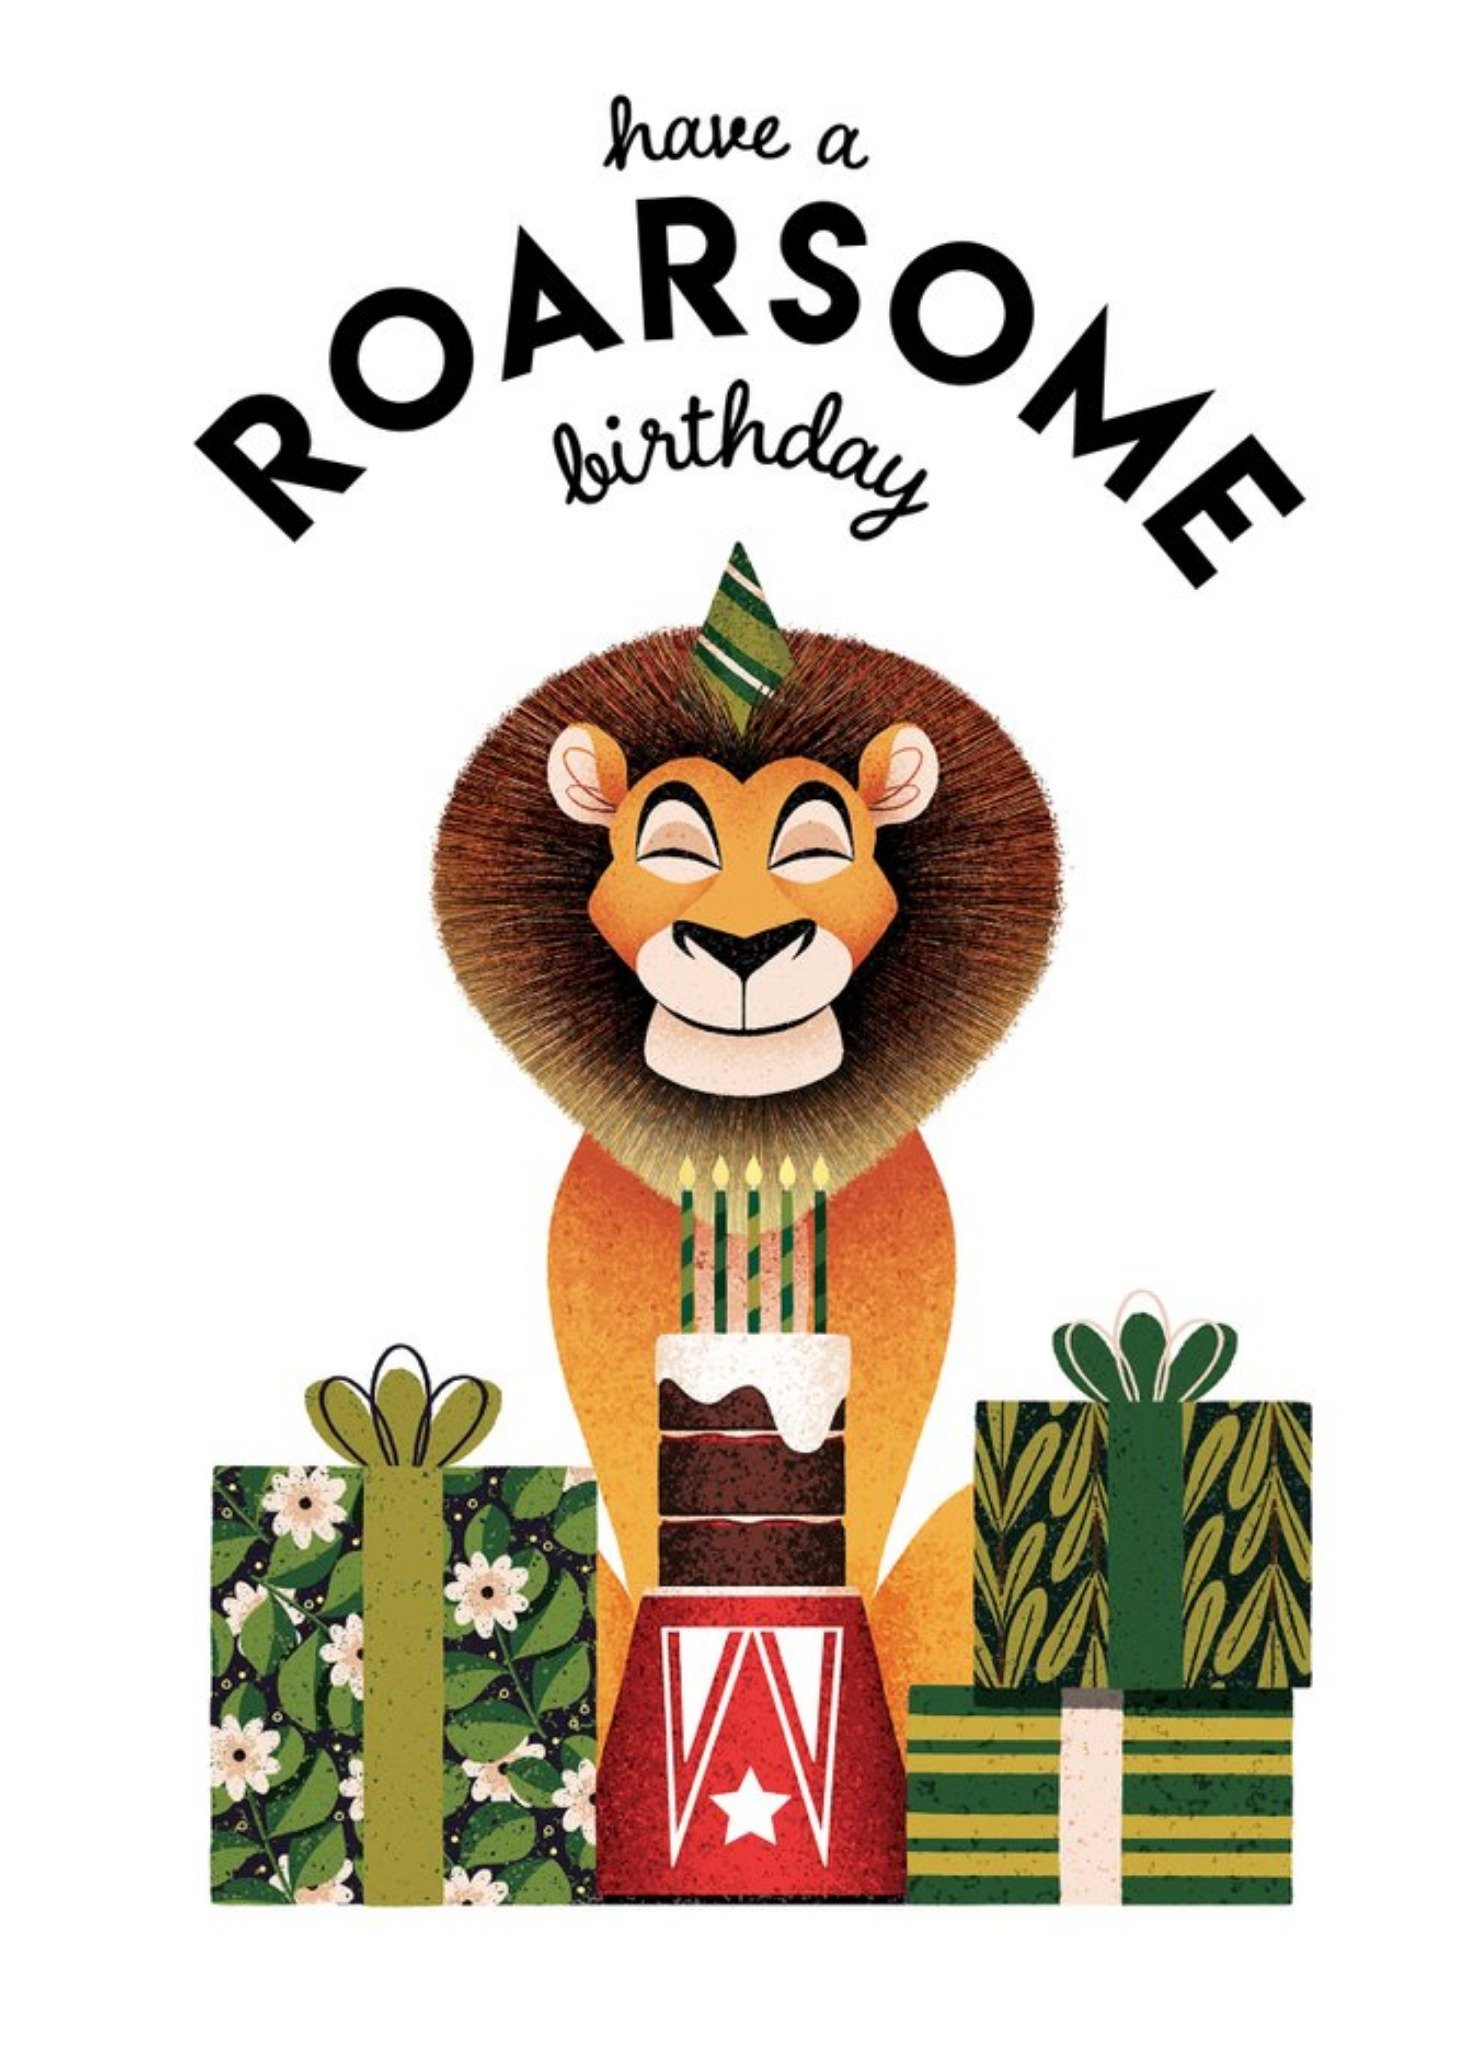 Moonpig Folio Illustration Of A Lion. Have A Roarsome Birthday Card, Large